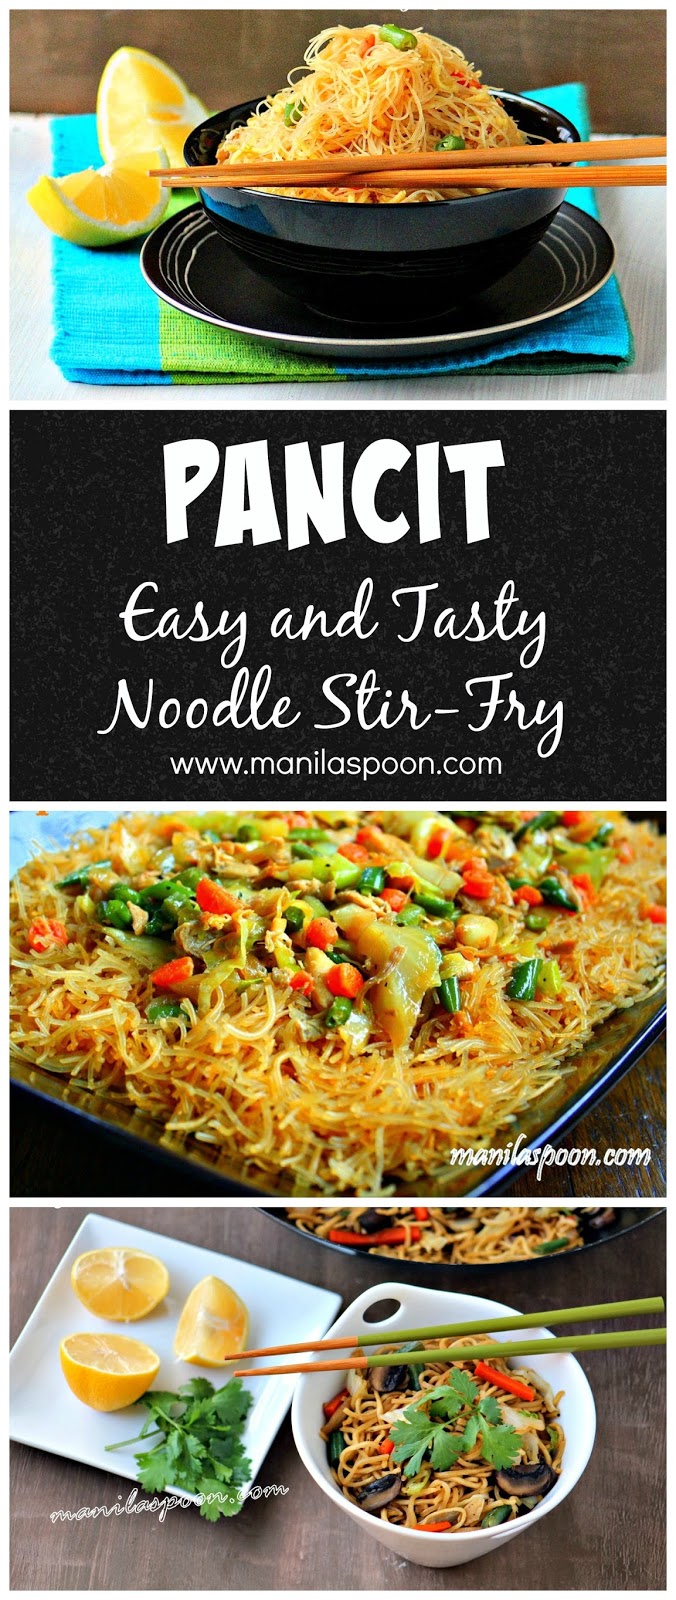 Savory deliciousness with a hint of sweetness and lemony tang is this tried and tested EASY recipe for the classic Filipino noodle stir-fry PANCIT! Perfect for any party as it is a sure crowd-pleaser!